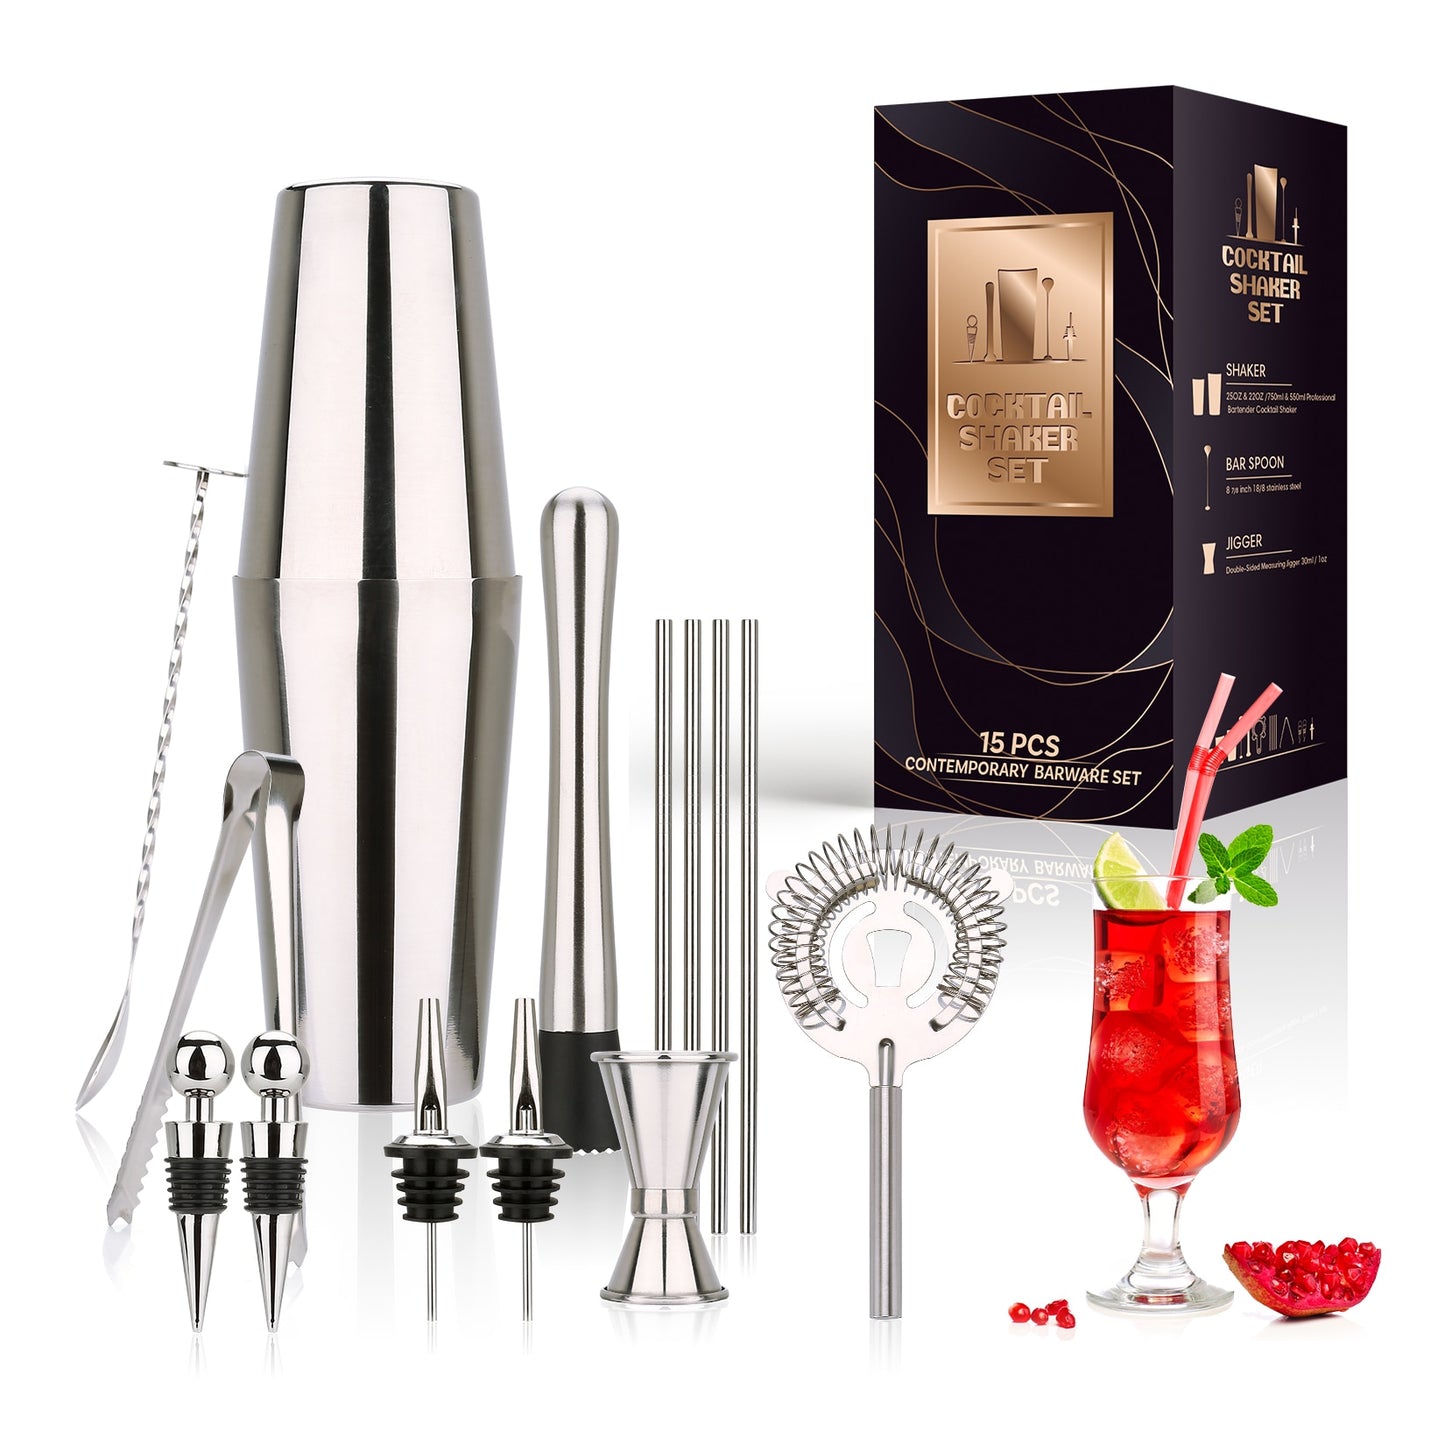 Cocktail Making Kits In Wooden Stands - Variety Of Styles - Copper/Silver